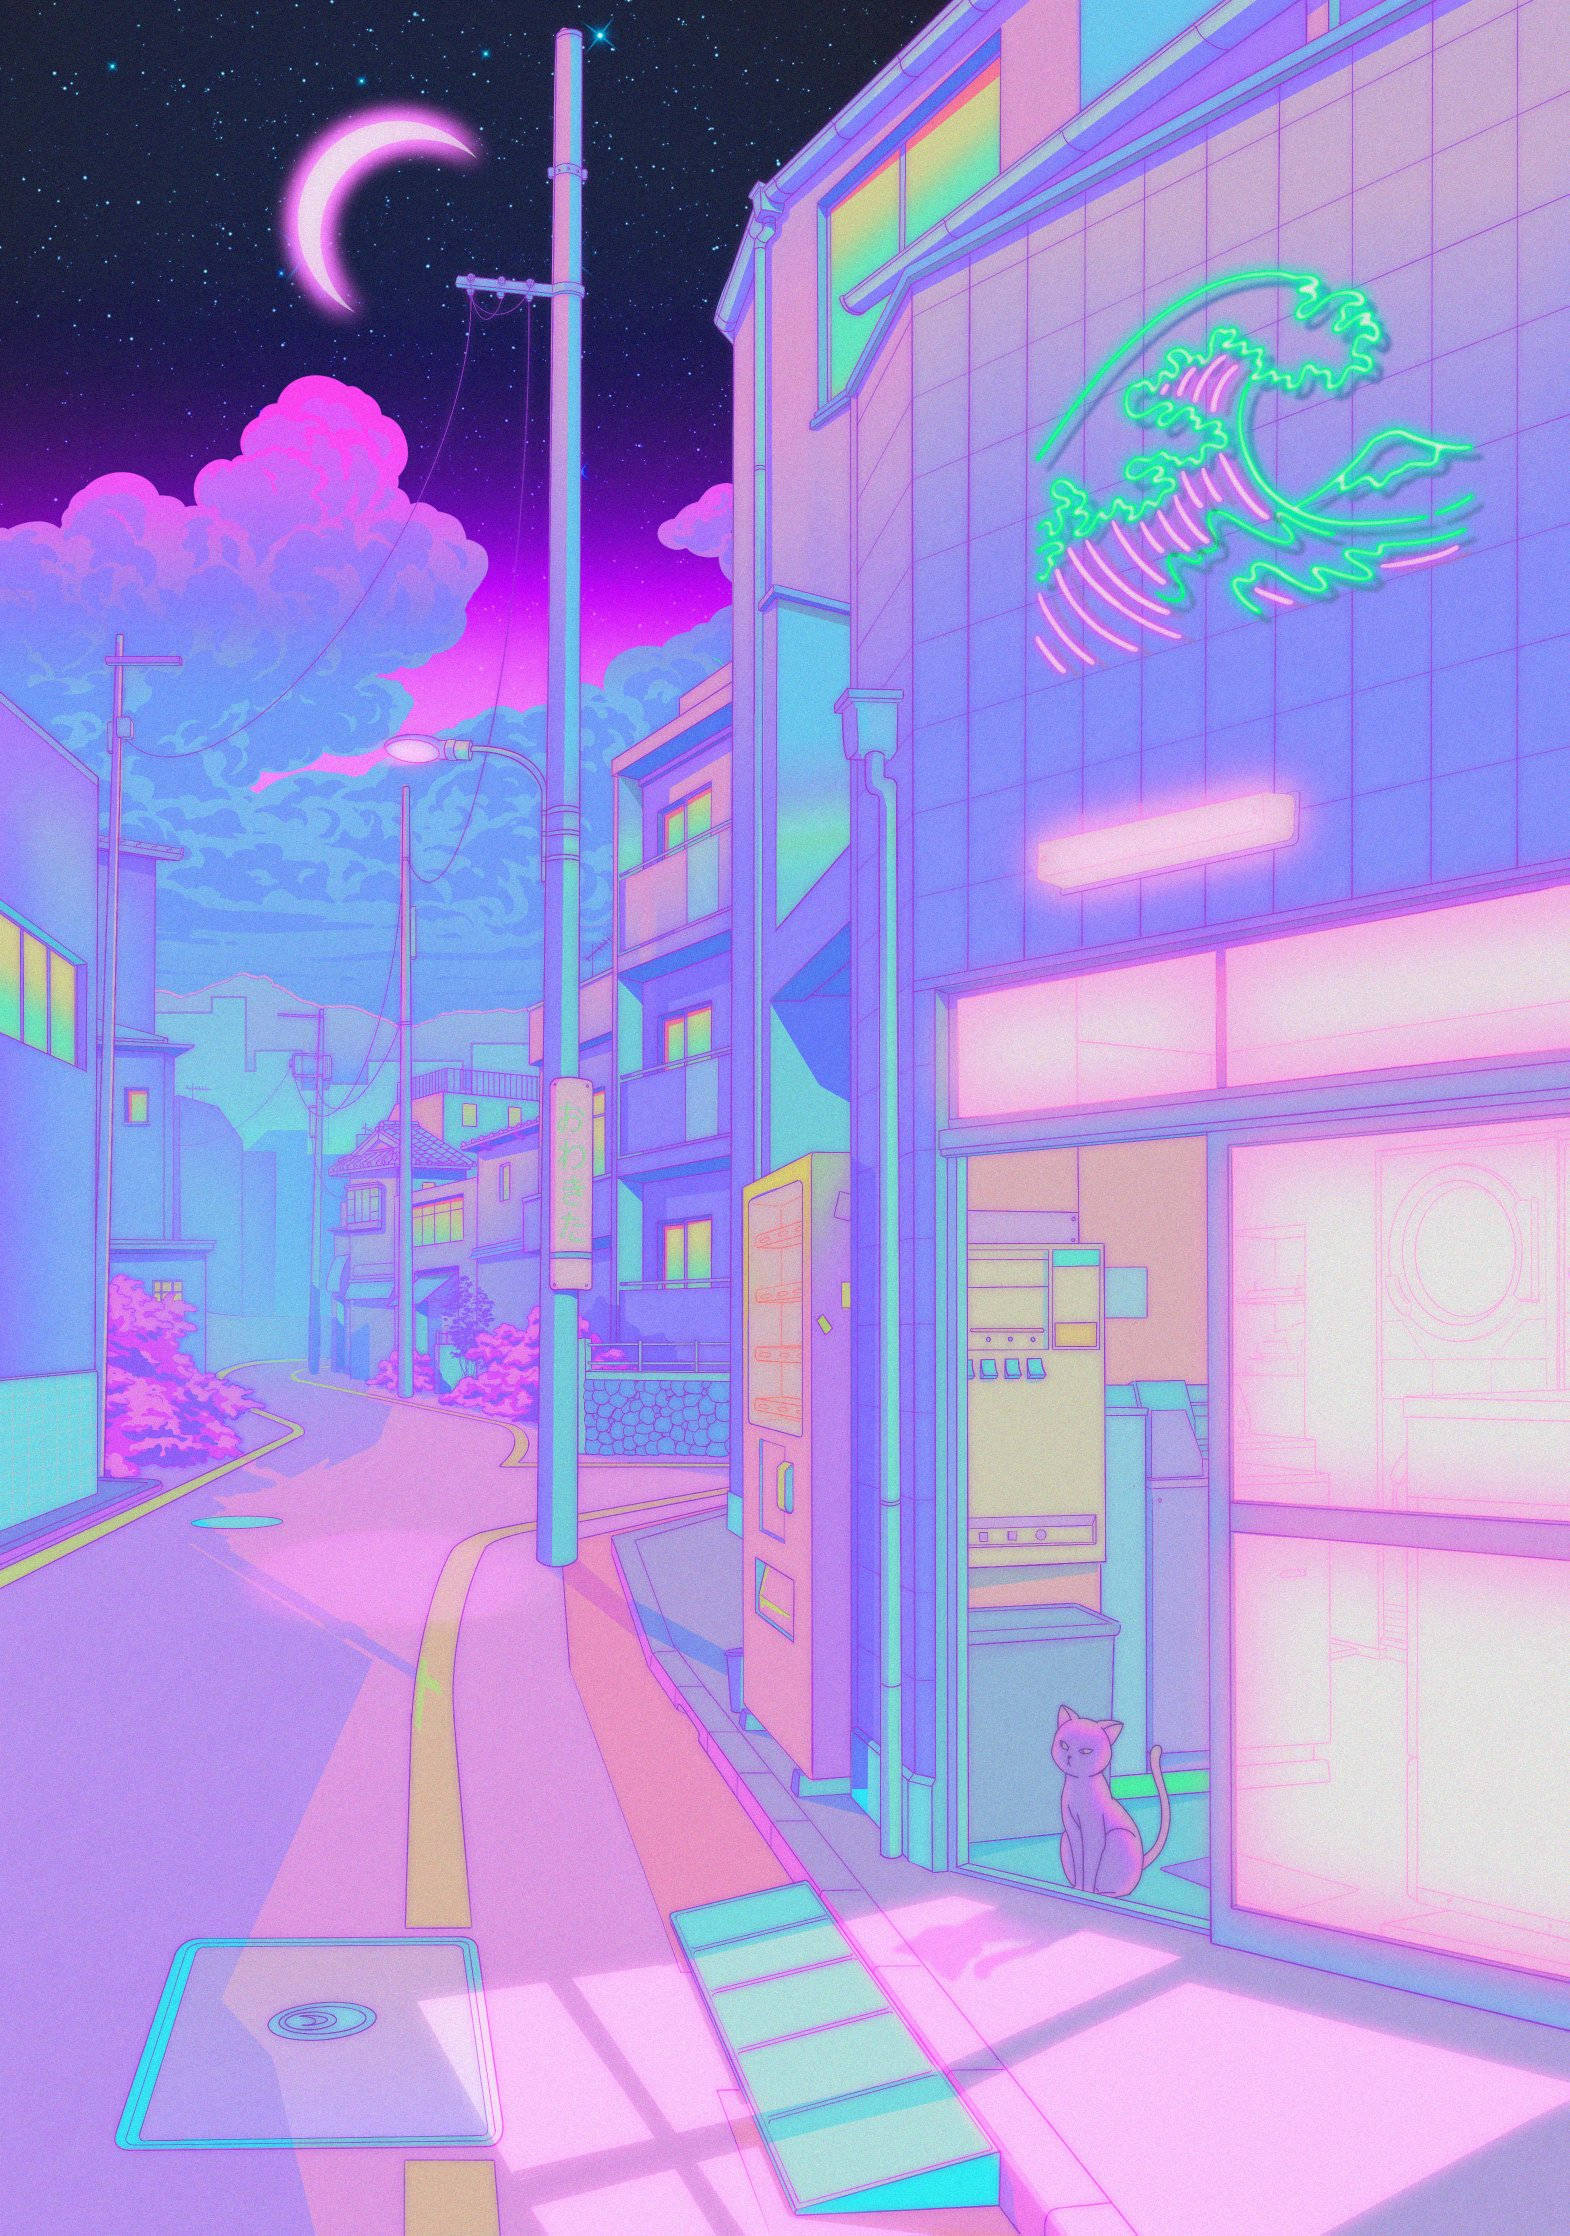 A street with buildings and cars in it - Japanese